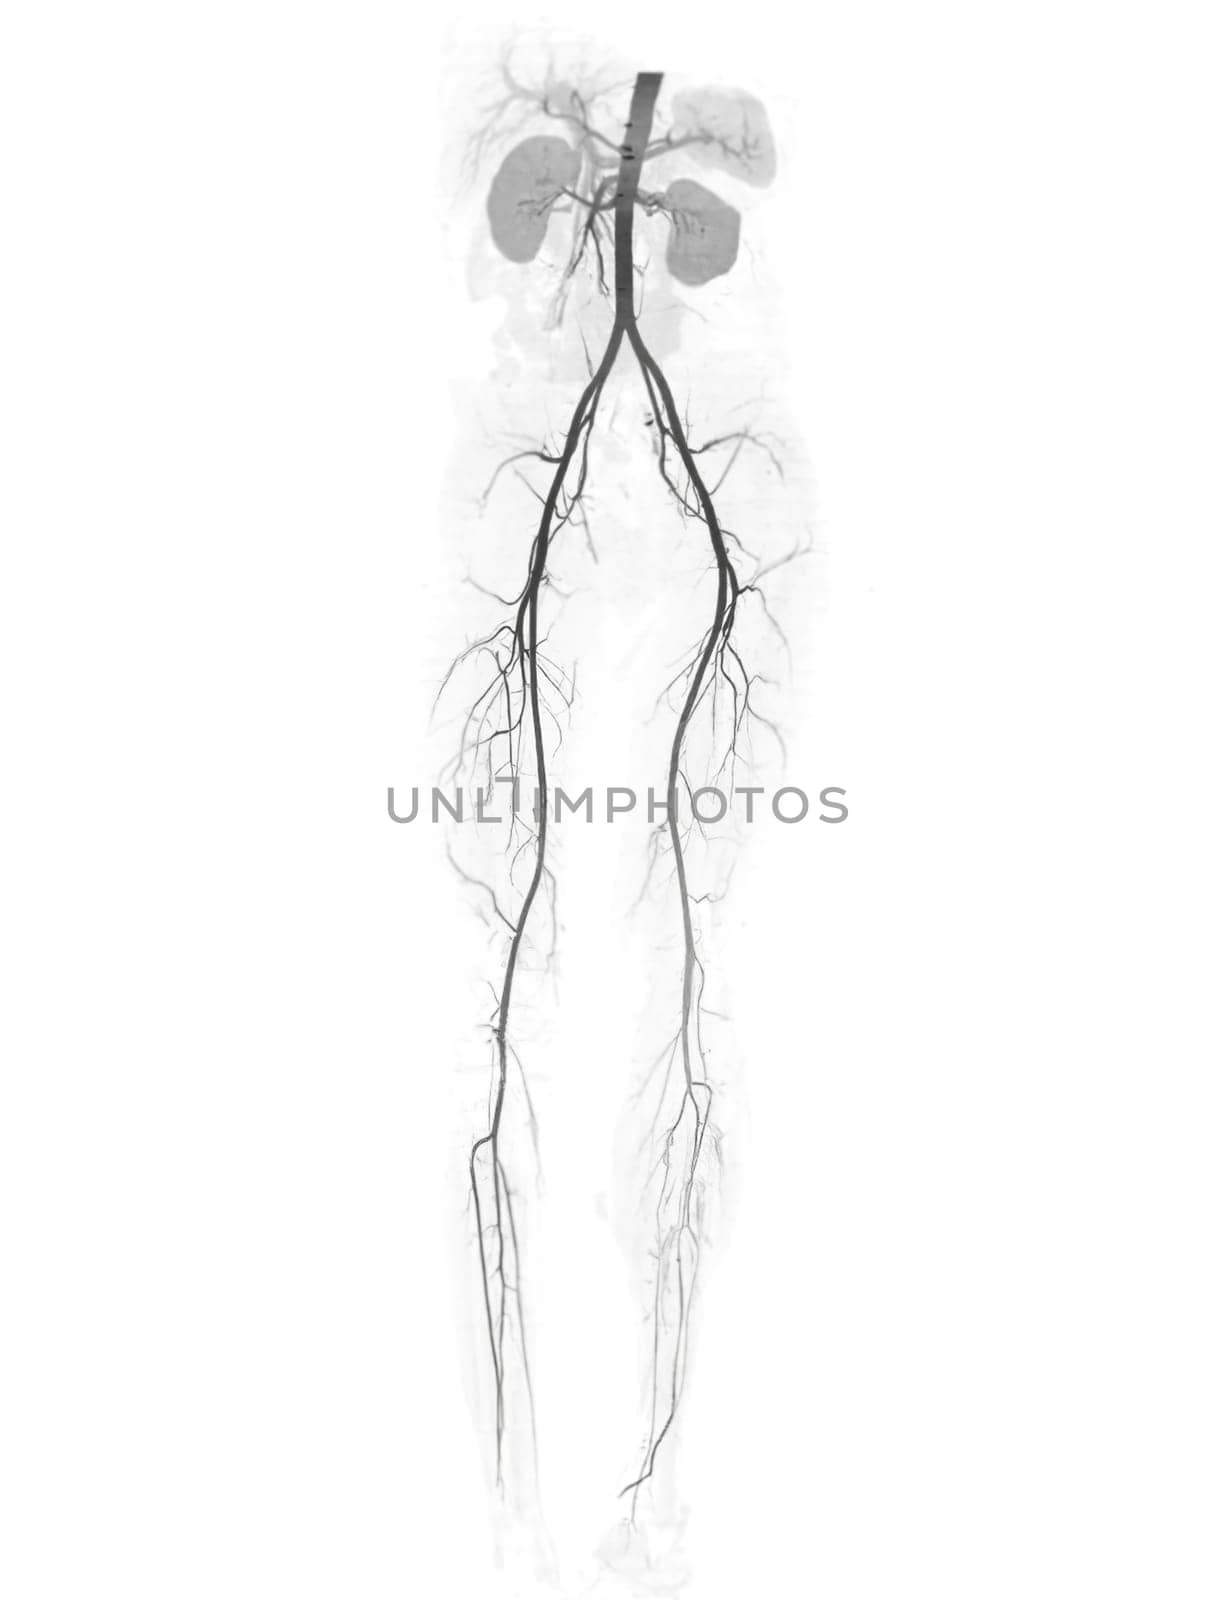 CTA femoral artery run off showing  femoral artery for diagnostic  Acute or Chronic Peripheral Arterial Disease. by samunella